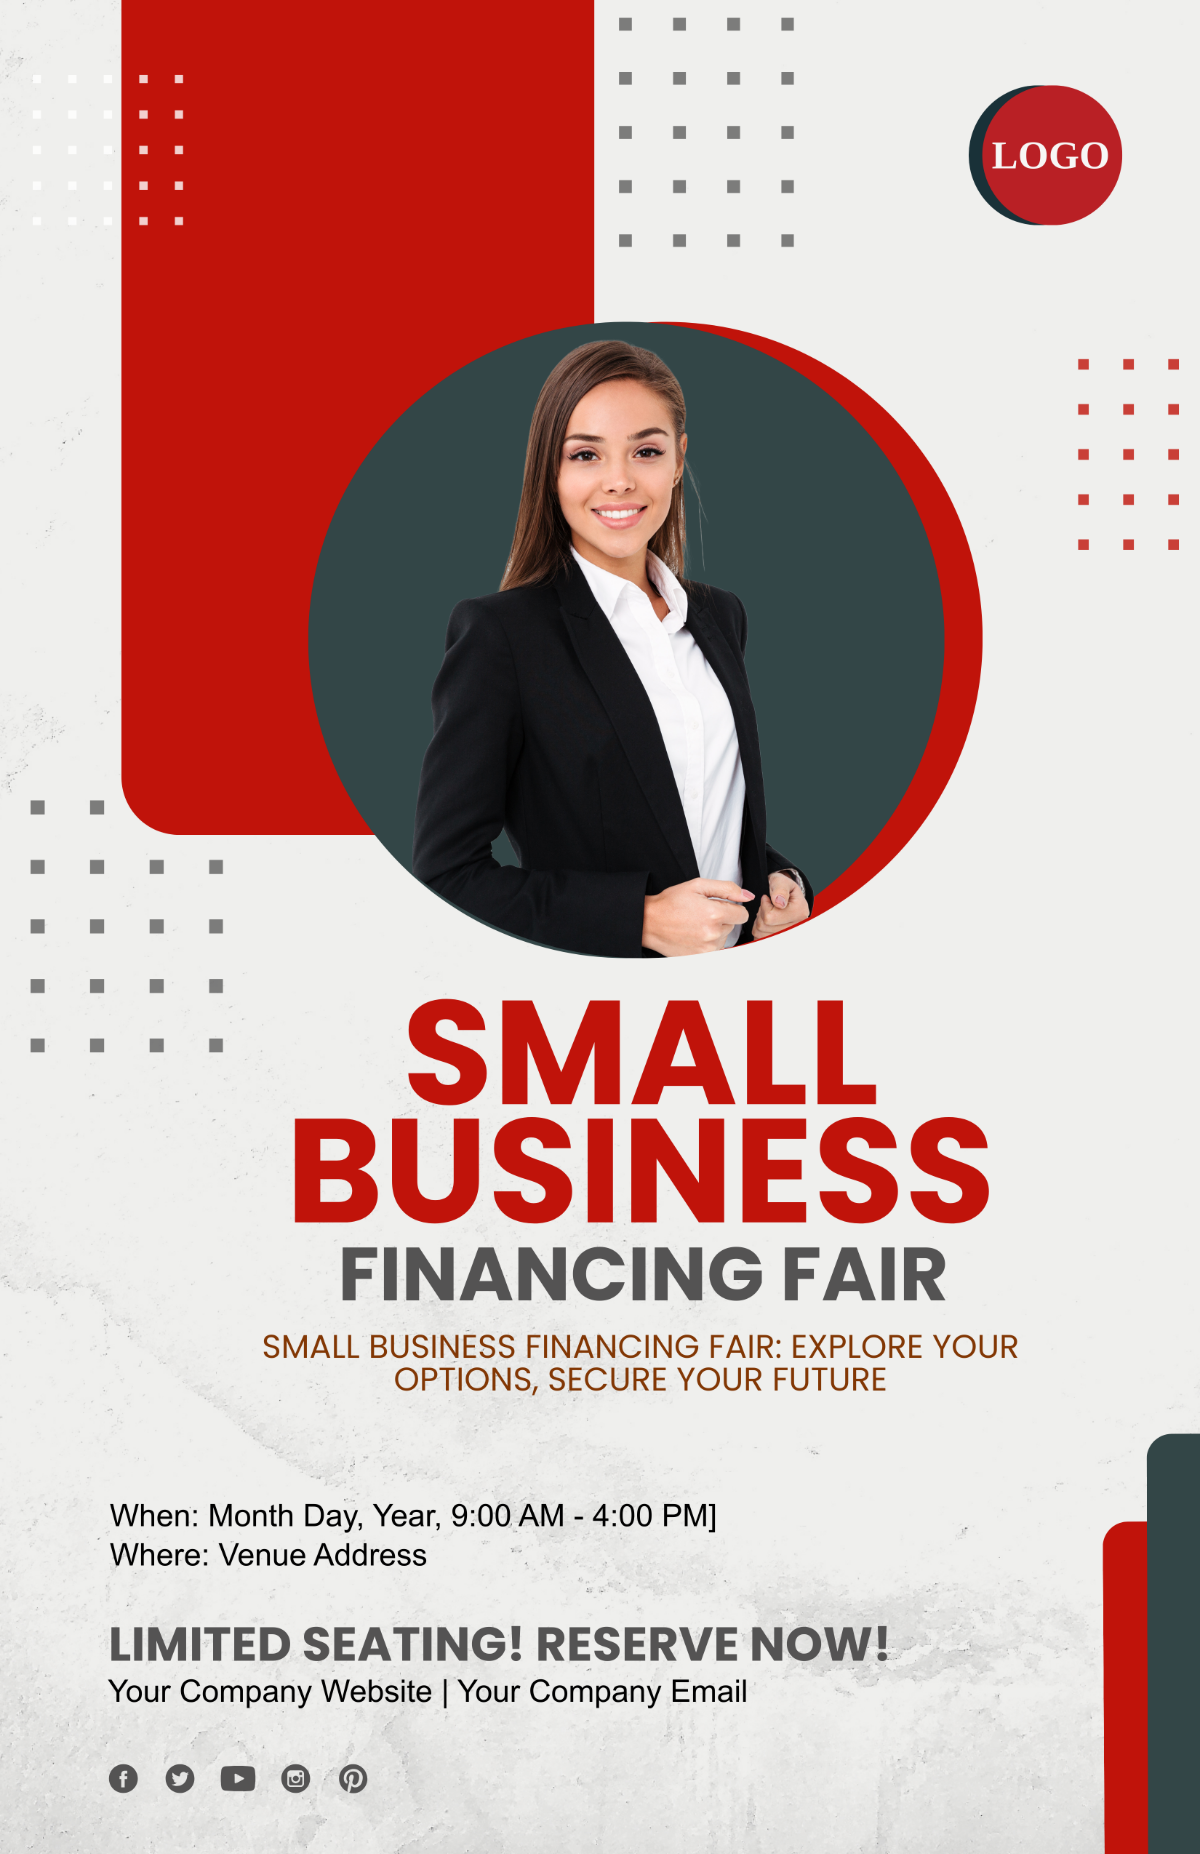 Small Business Financing Fair Poster